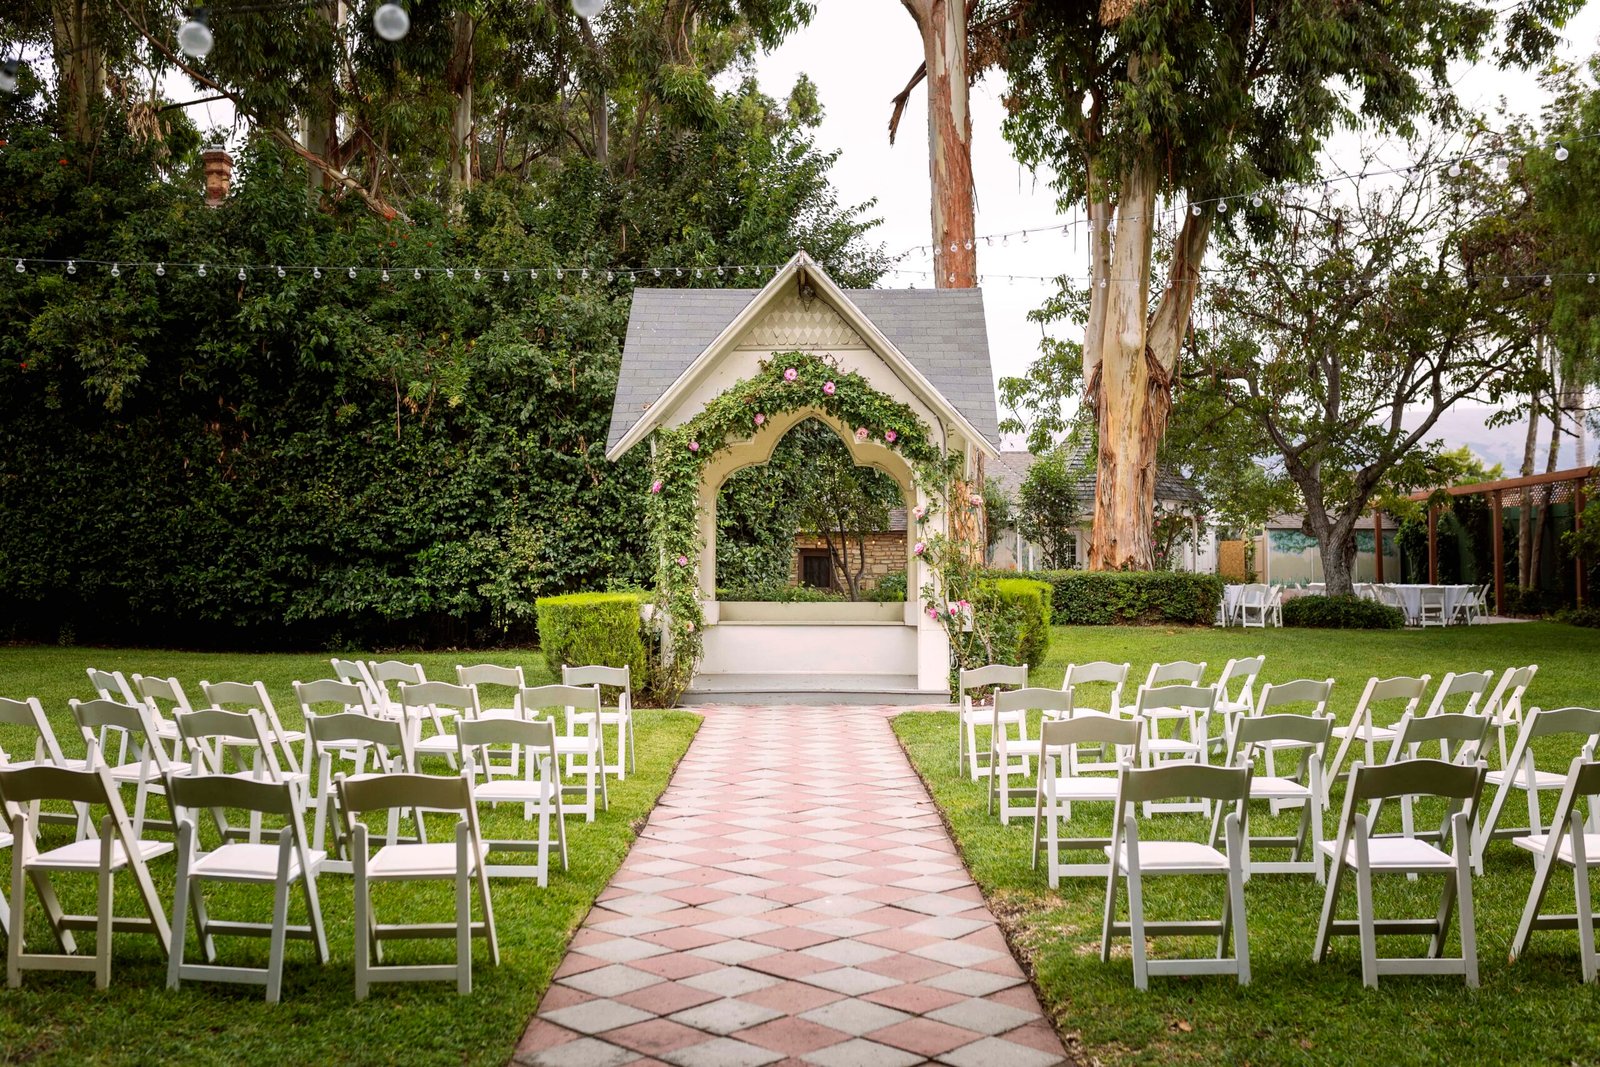 Wedding ceremony gazebo with roses growing on the arch